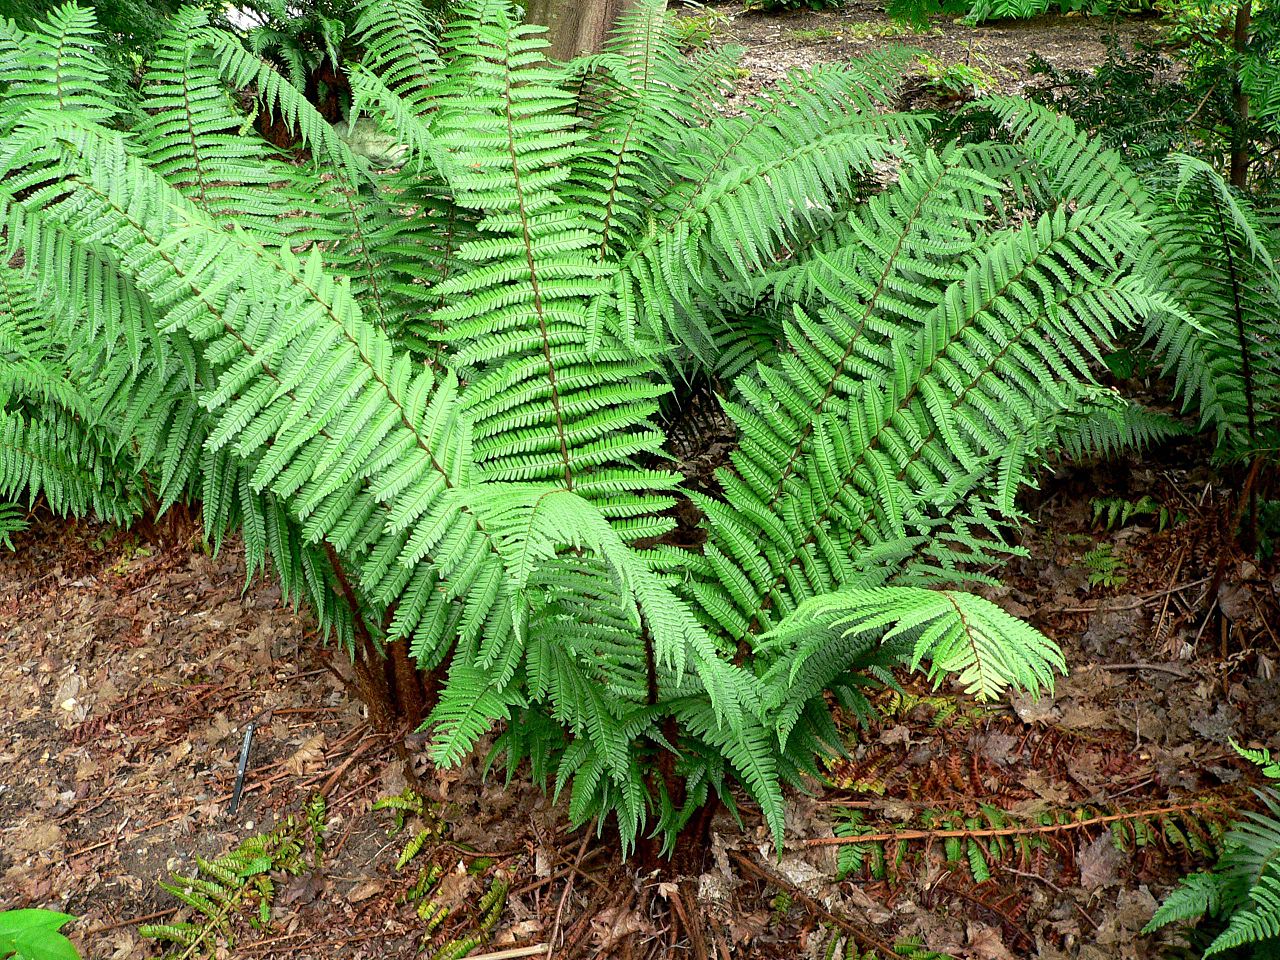 Dryopteris, rustic and decorative ferns for the home